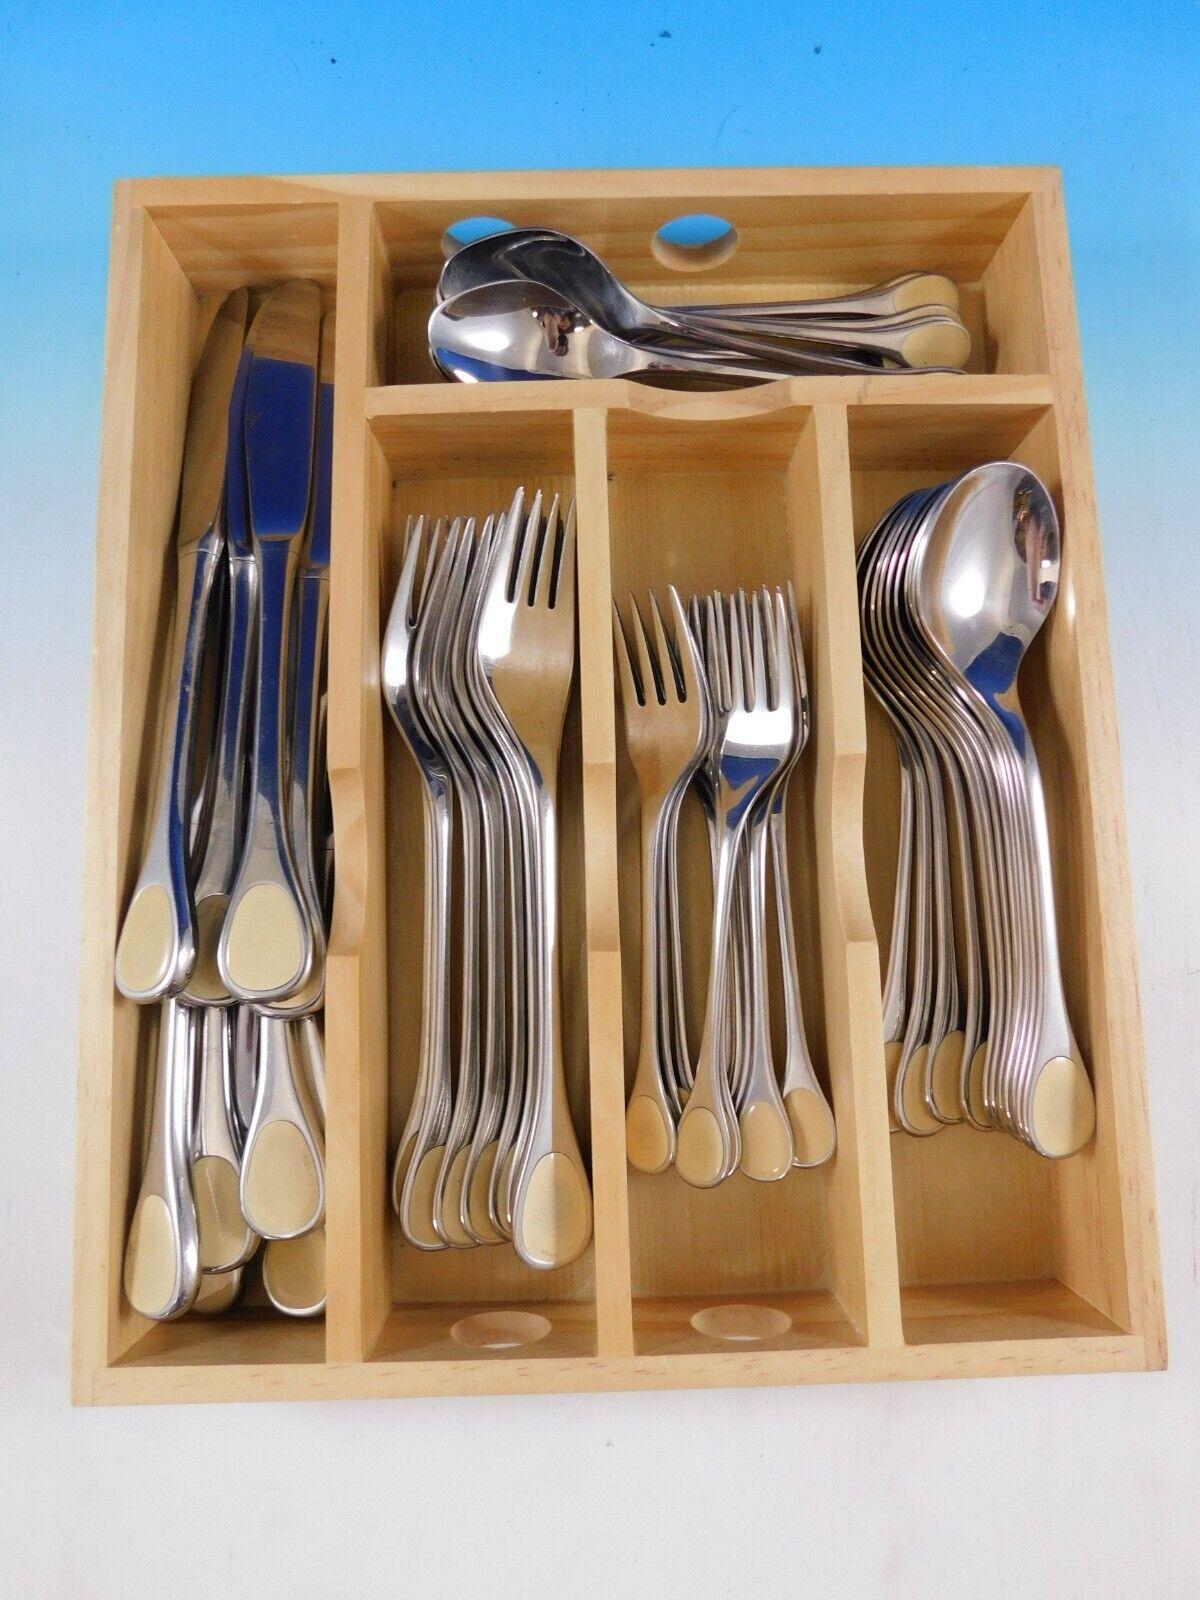 Mid-Century Modern design Happy Day with butterscotch enamel by Furst Furosil (Germany) stainless steel flatware set. This 60 piece set includes:

12 Knives, 8 5/8